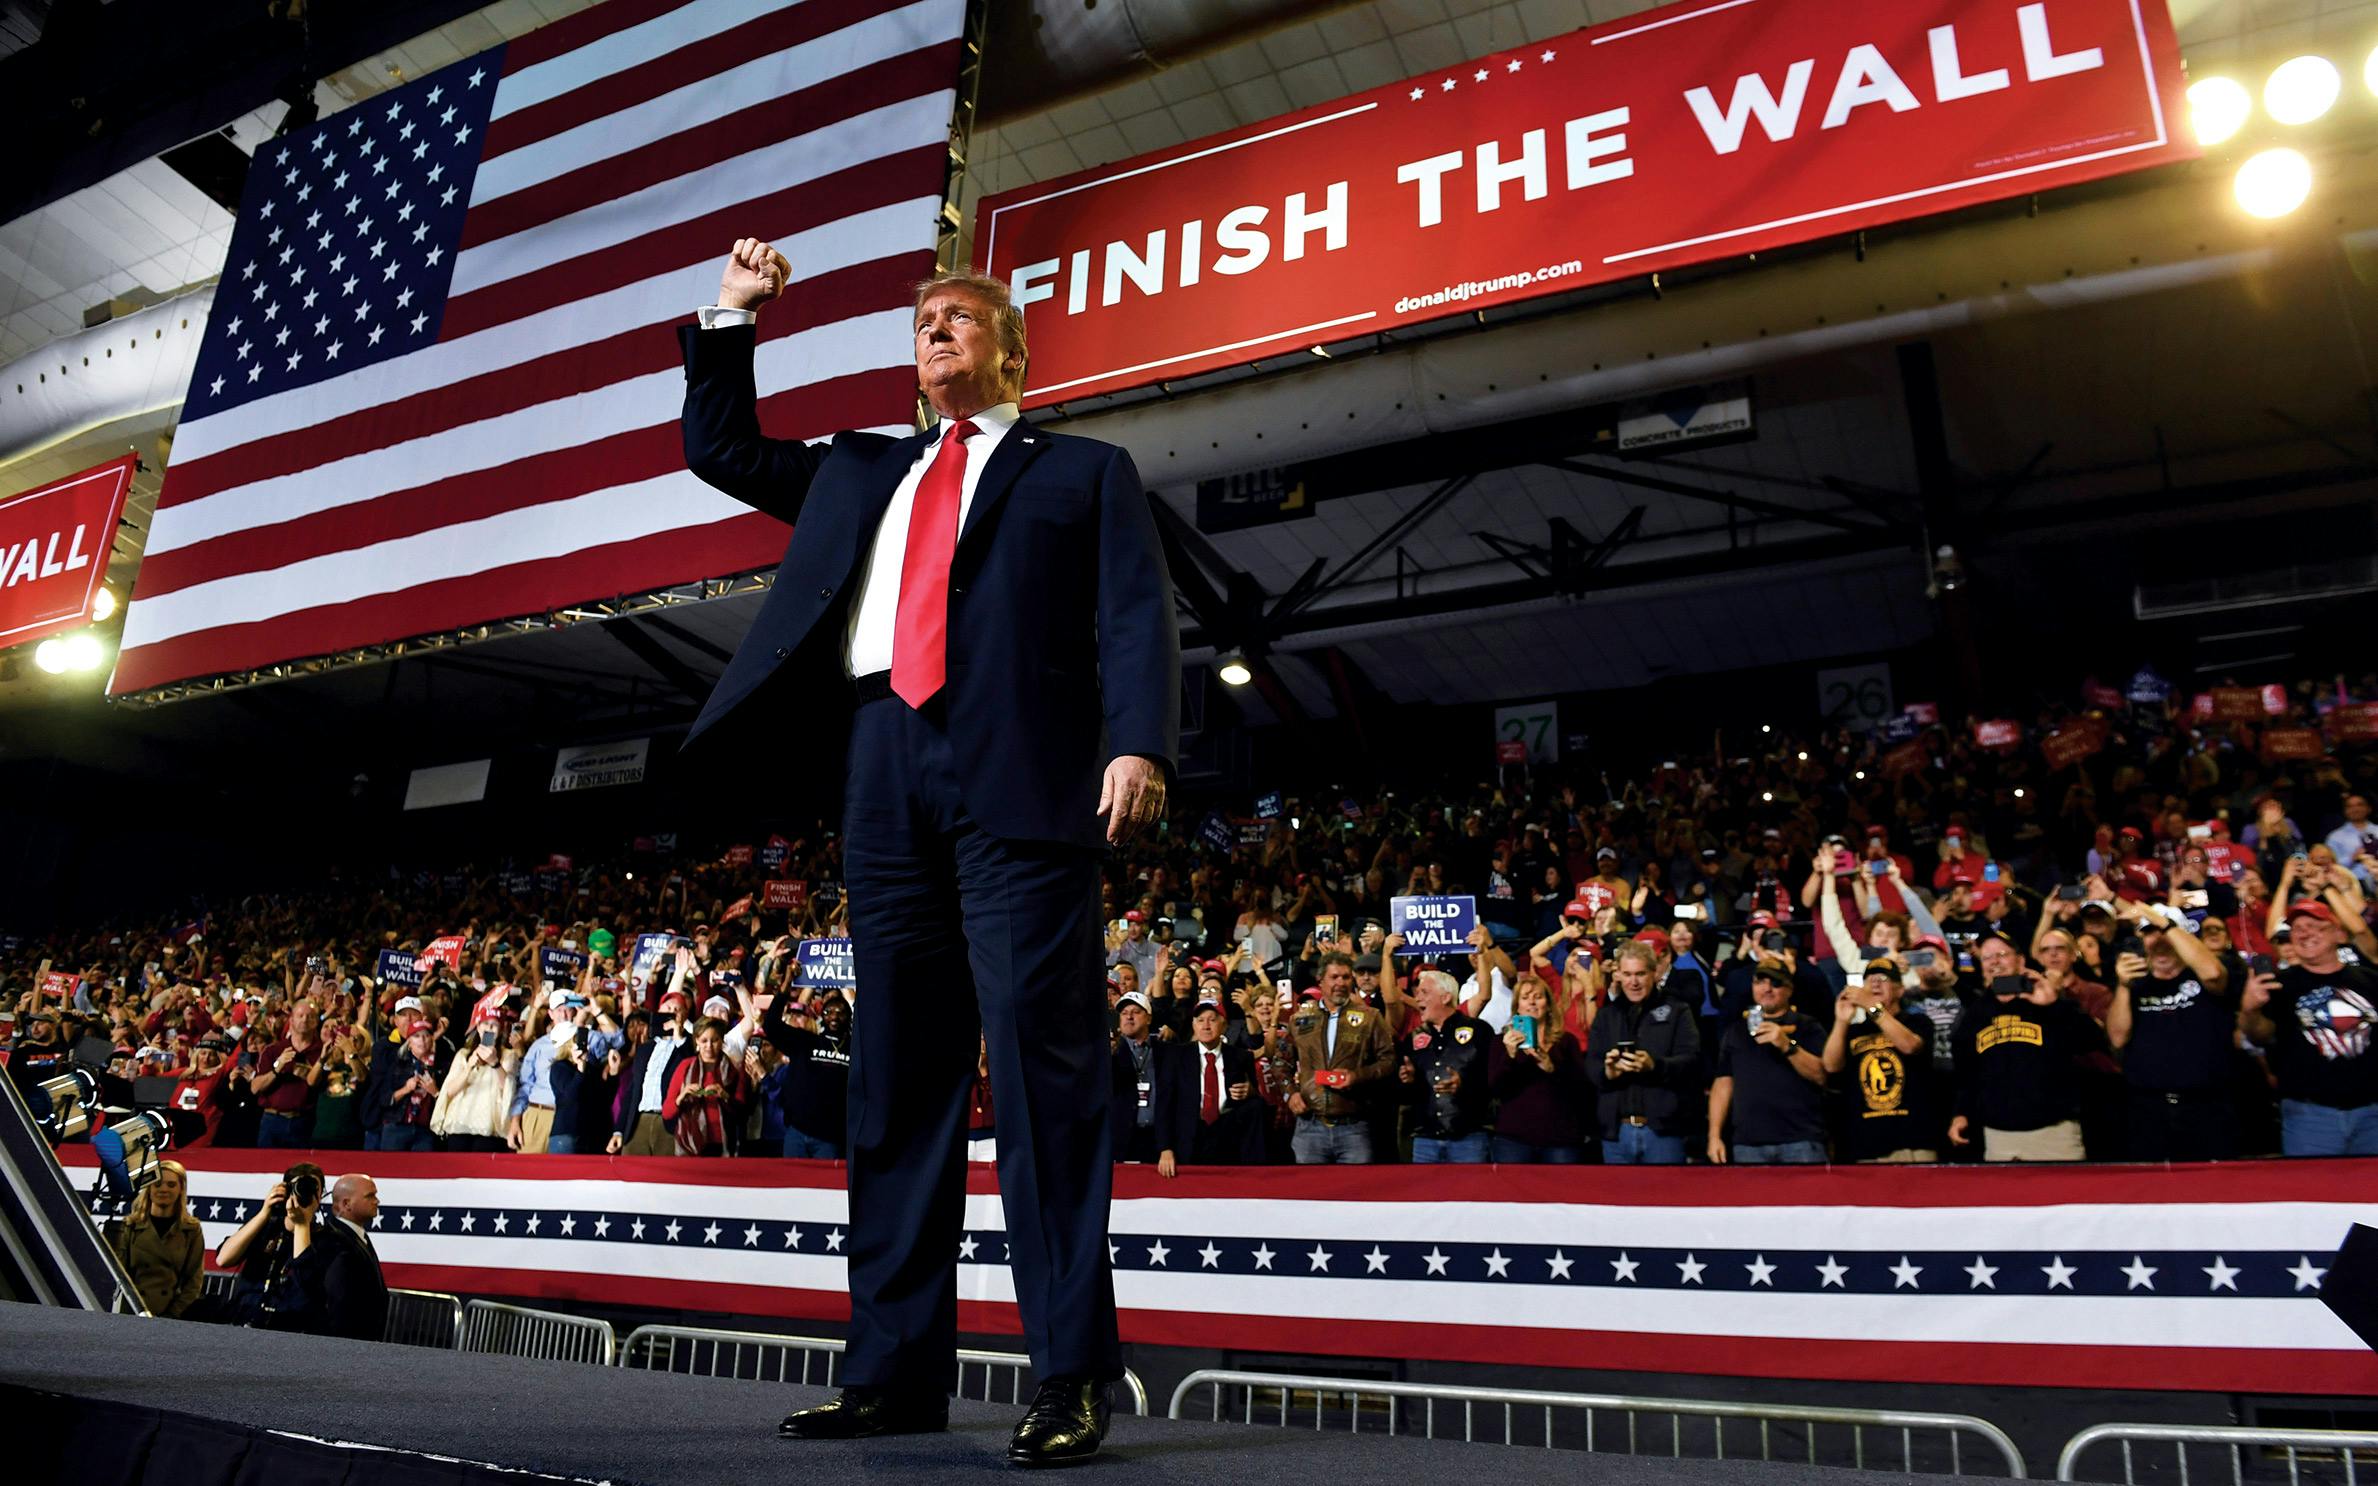 Donald Trump Vows to "Finish the Wall" in El Paso Political Rally